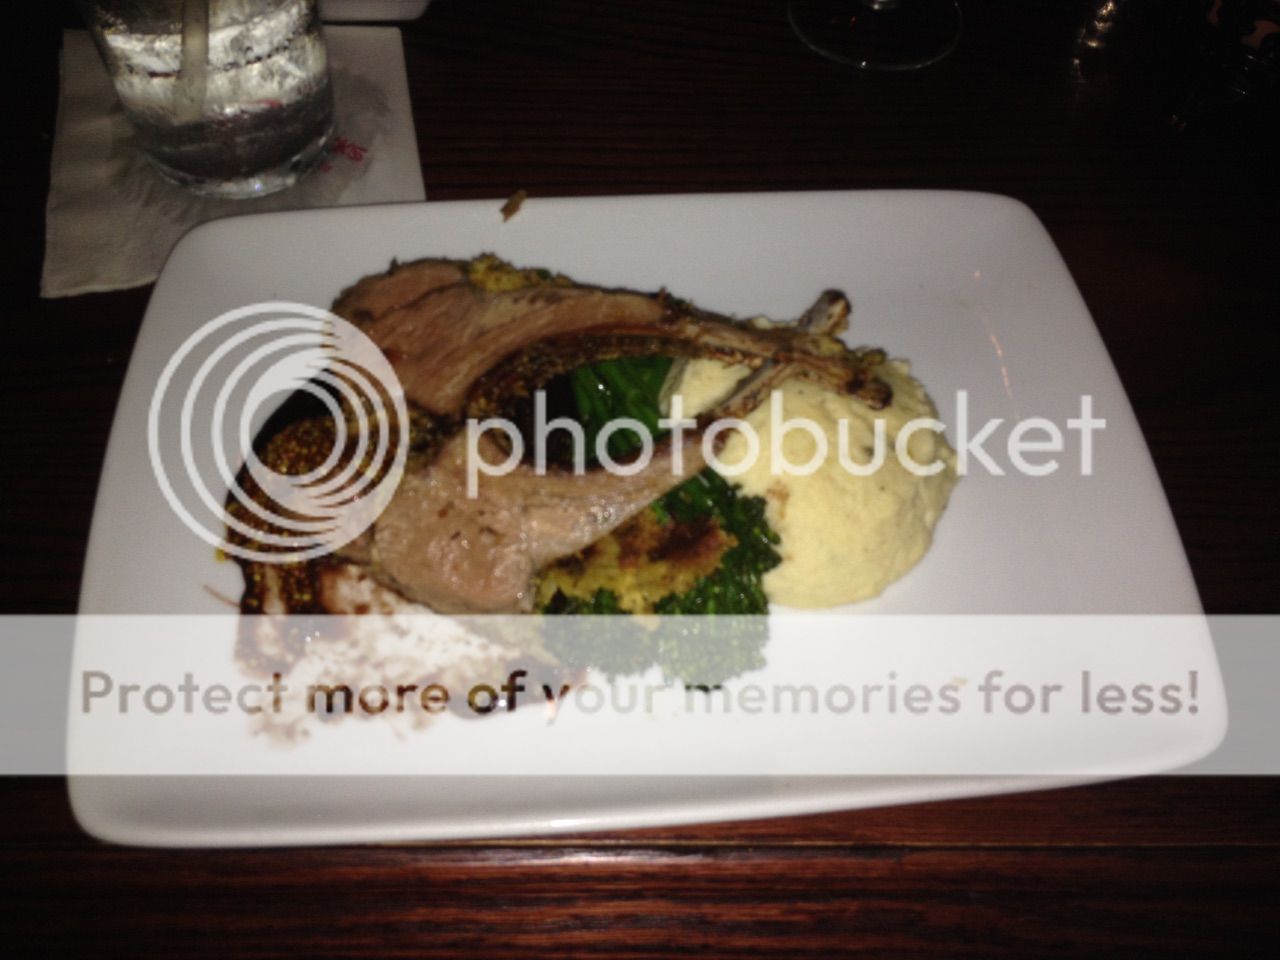 051315%20Be%20Our%20Guest%20Lamb%20Shawn%20Dinner_zpscup1jf2s.jpg